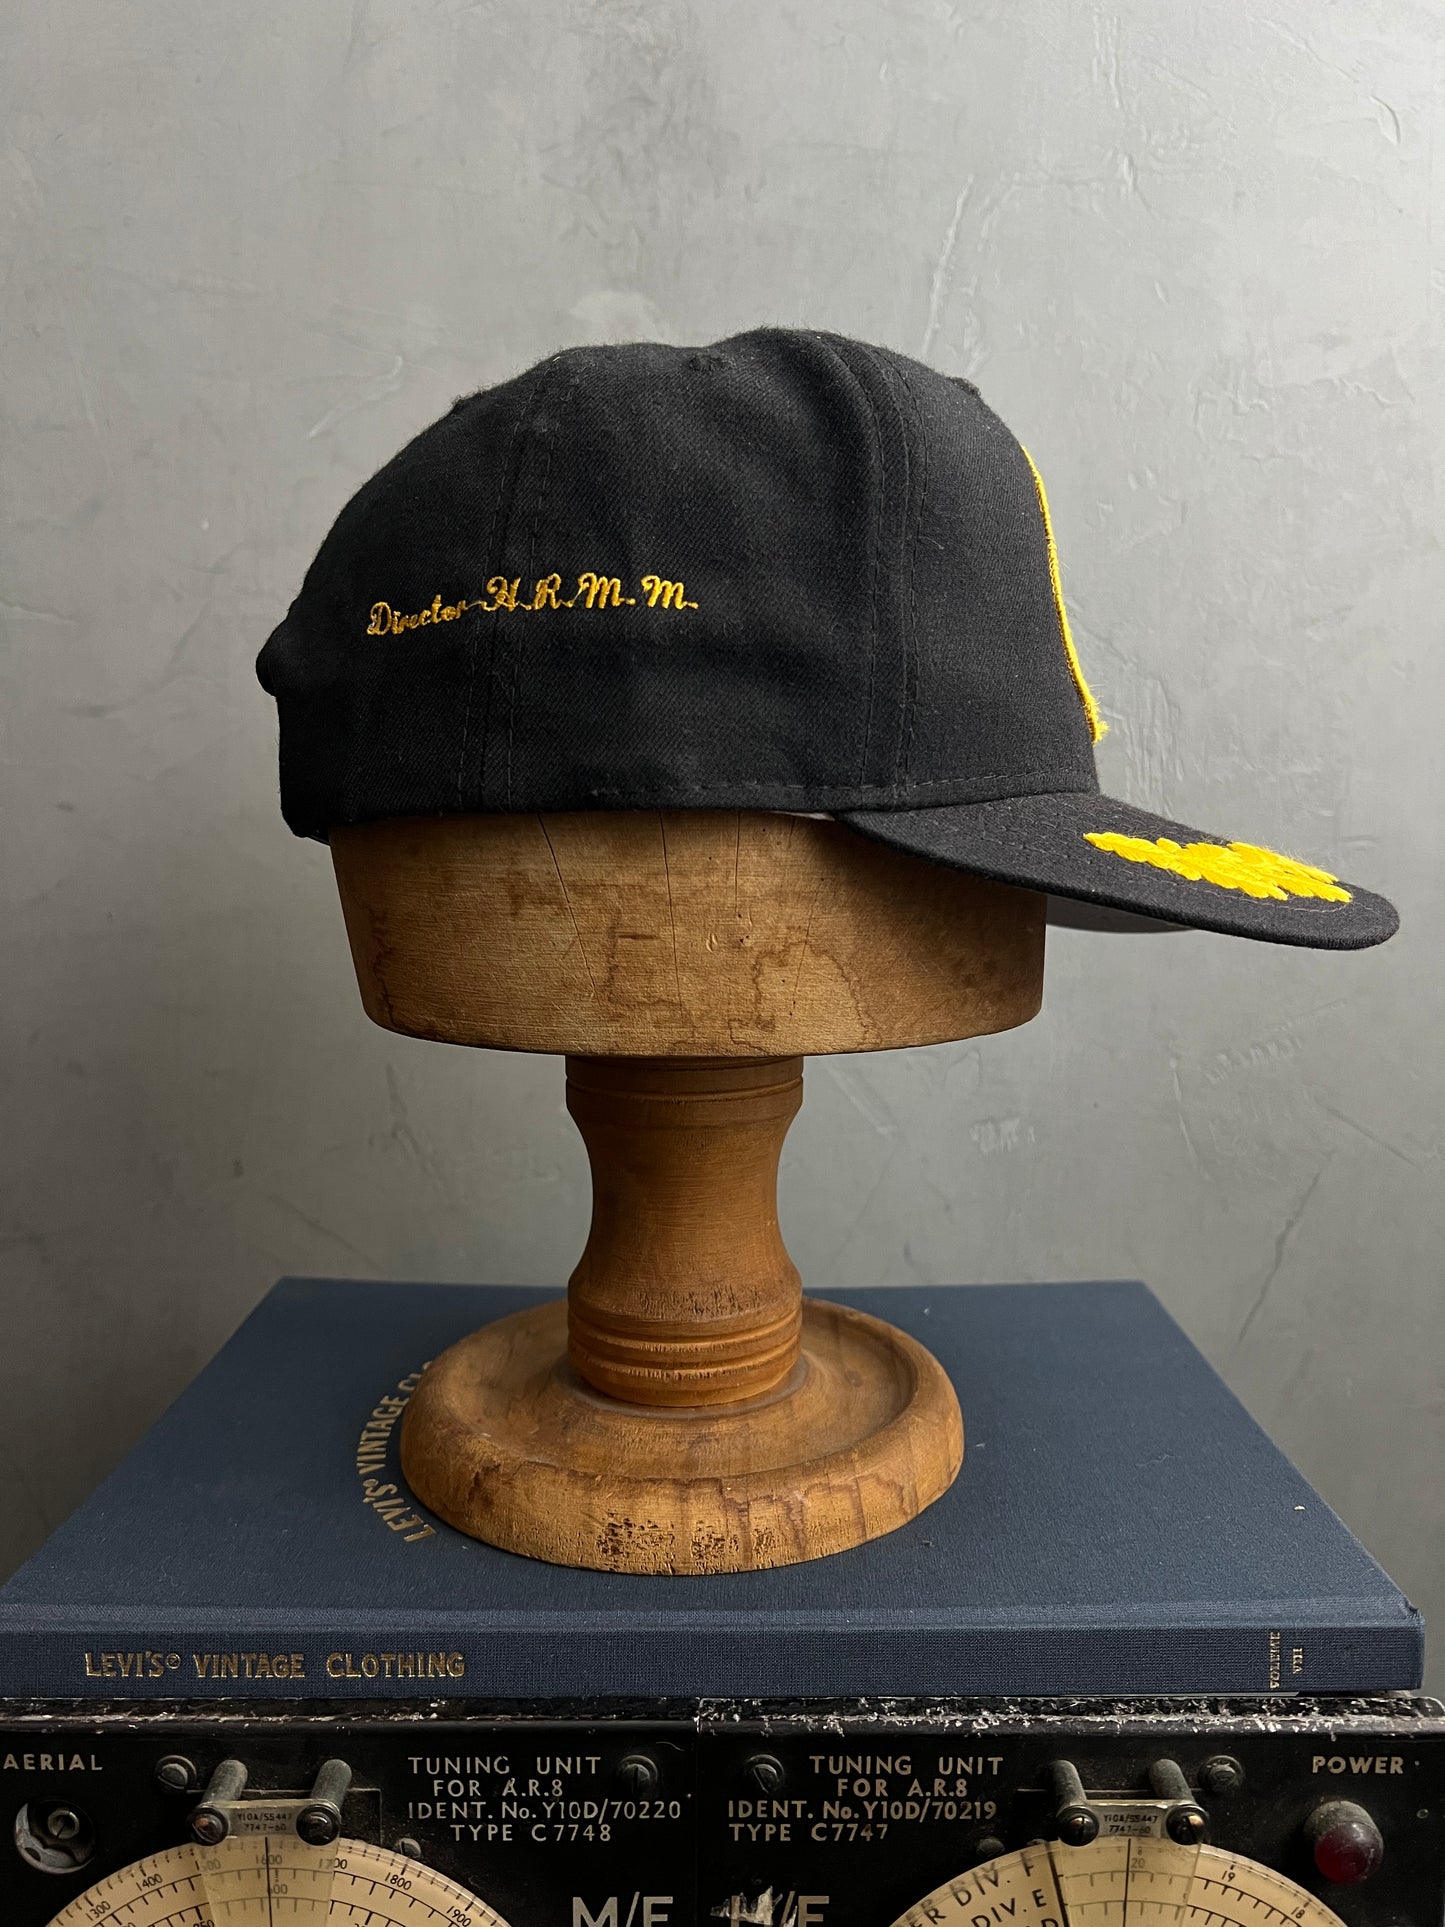 Chemical Workers Union Cap